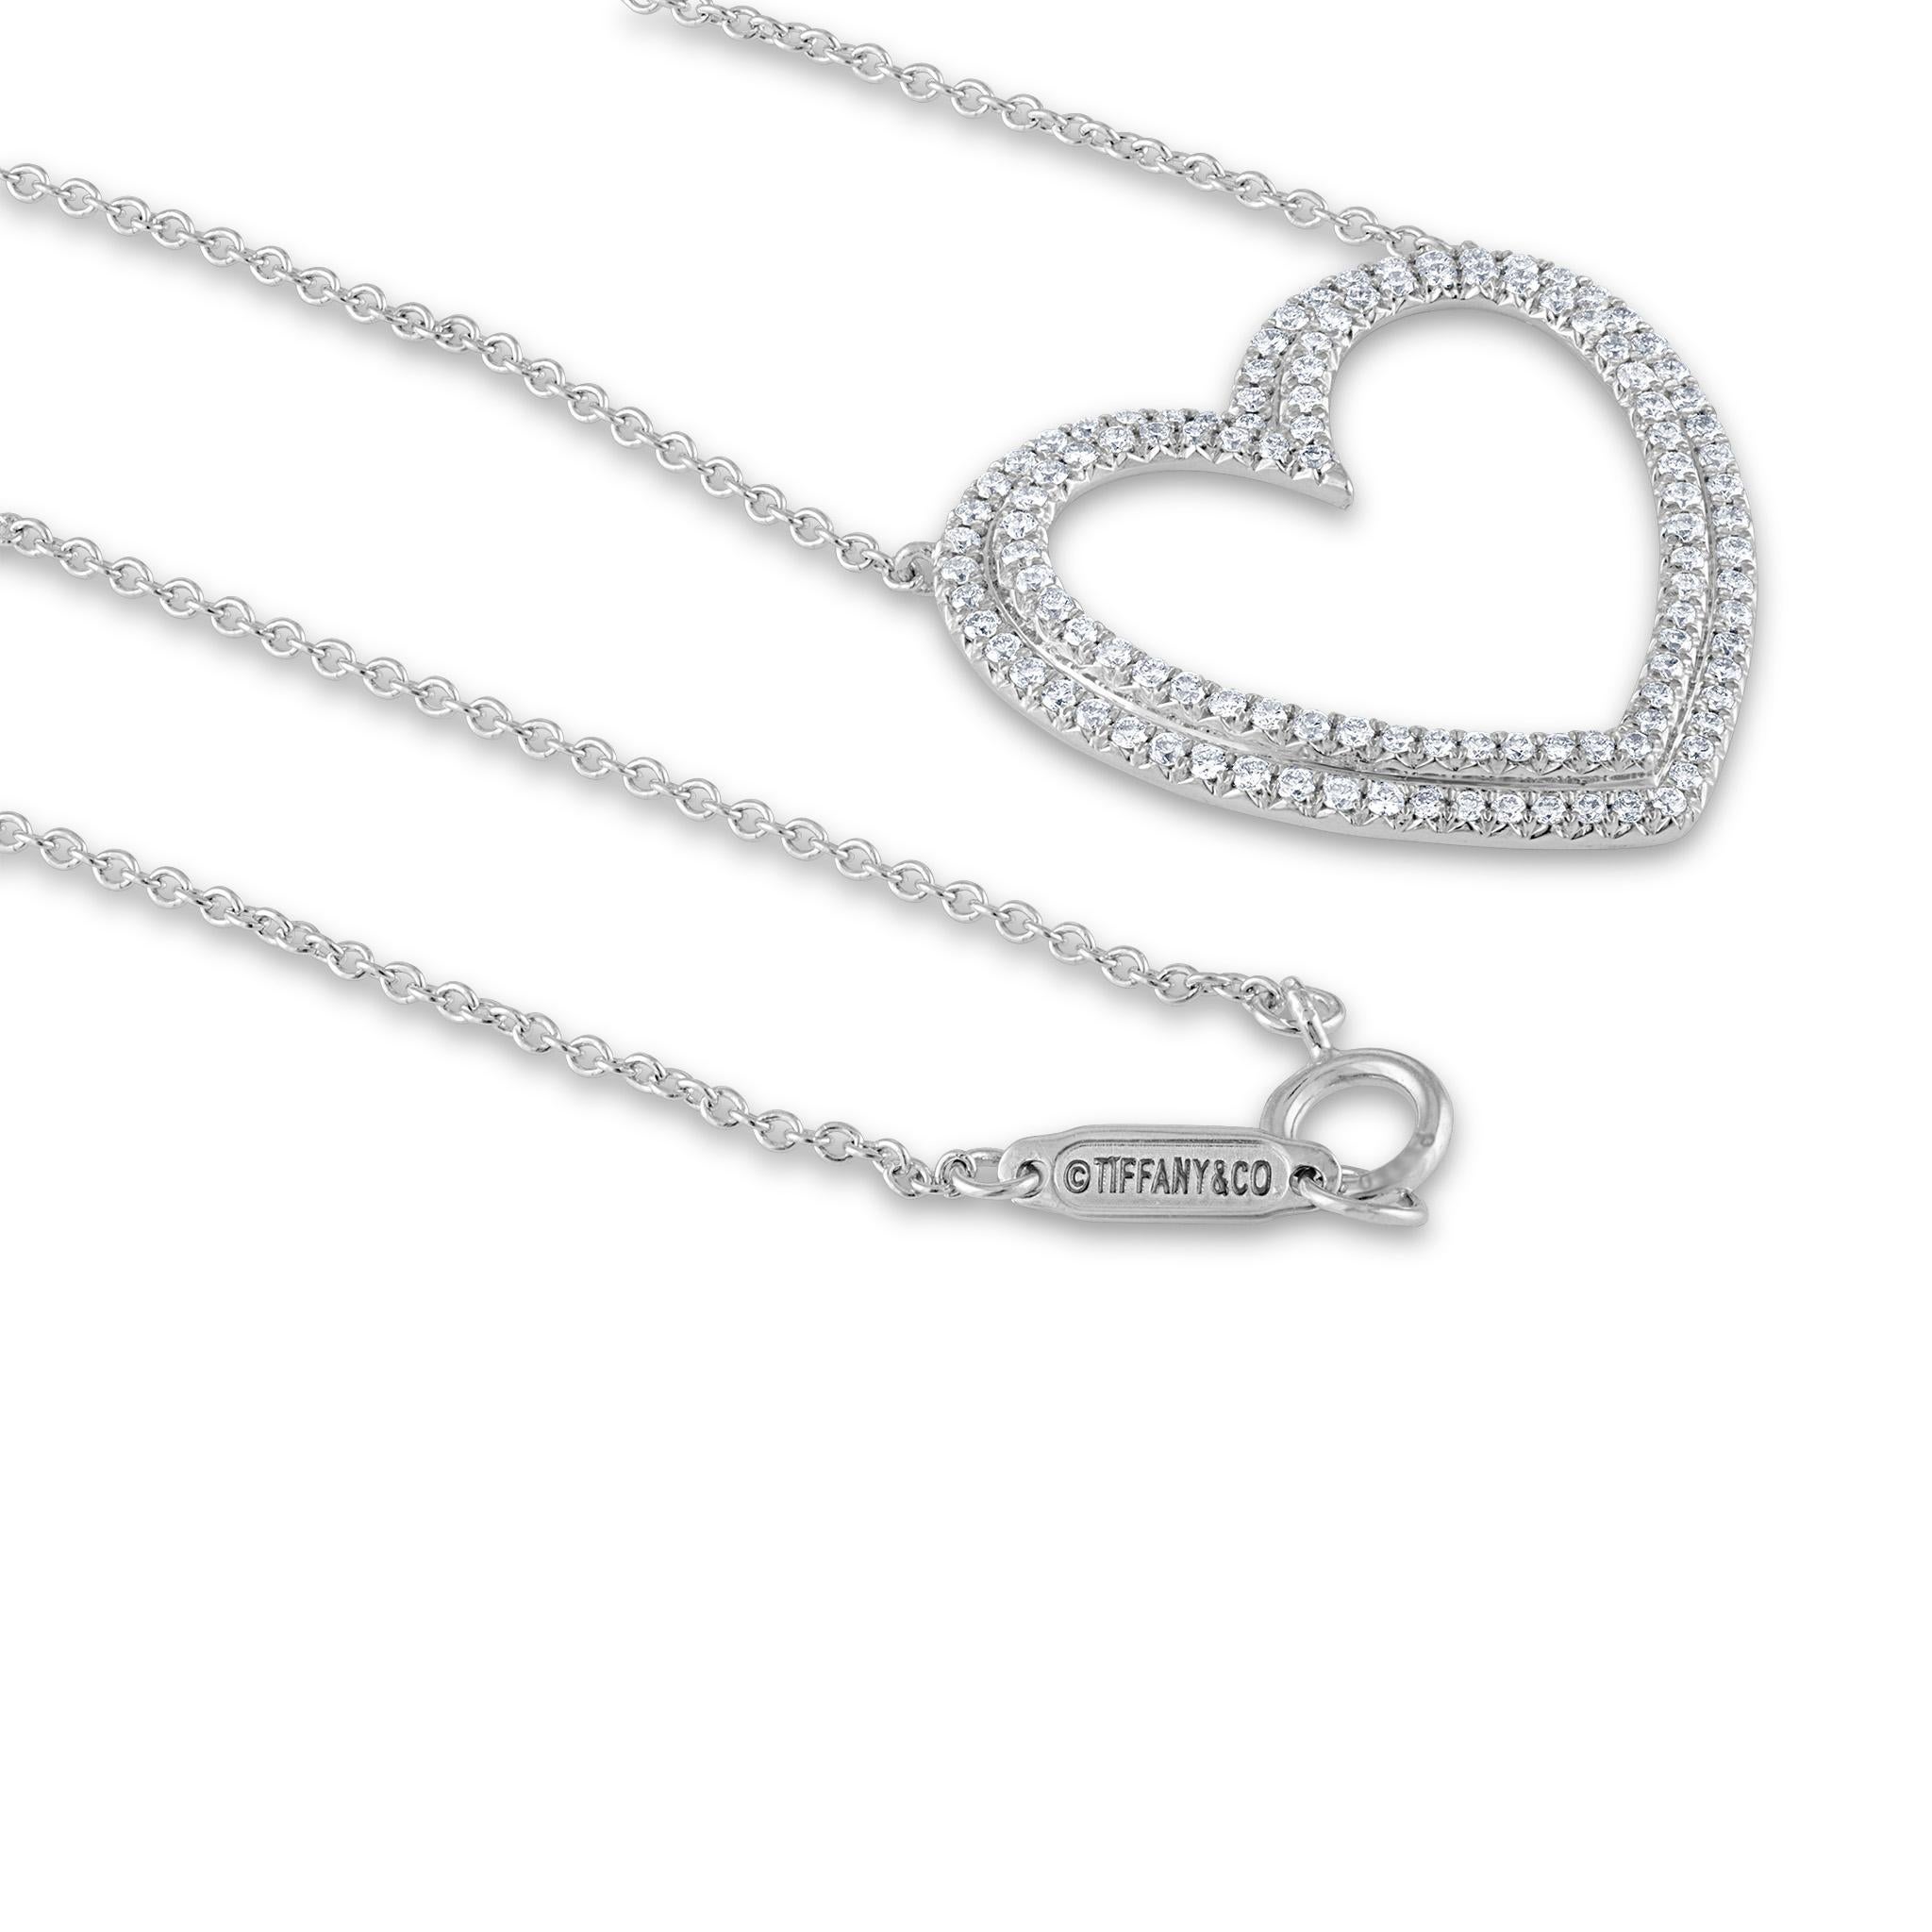 METAL TYPE: Platinum
TOTAL WEIGHT: 5.2g
STONE WEIGHT: 0.80ct twd
NECKLACE LENGTH: 17.5